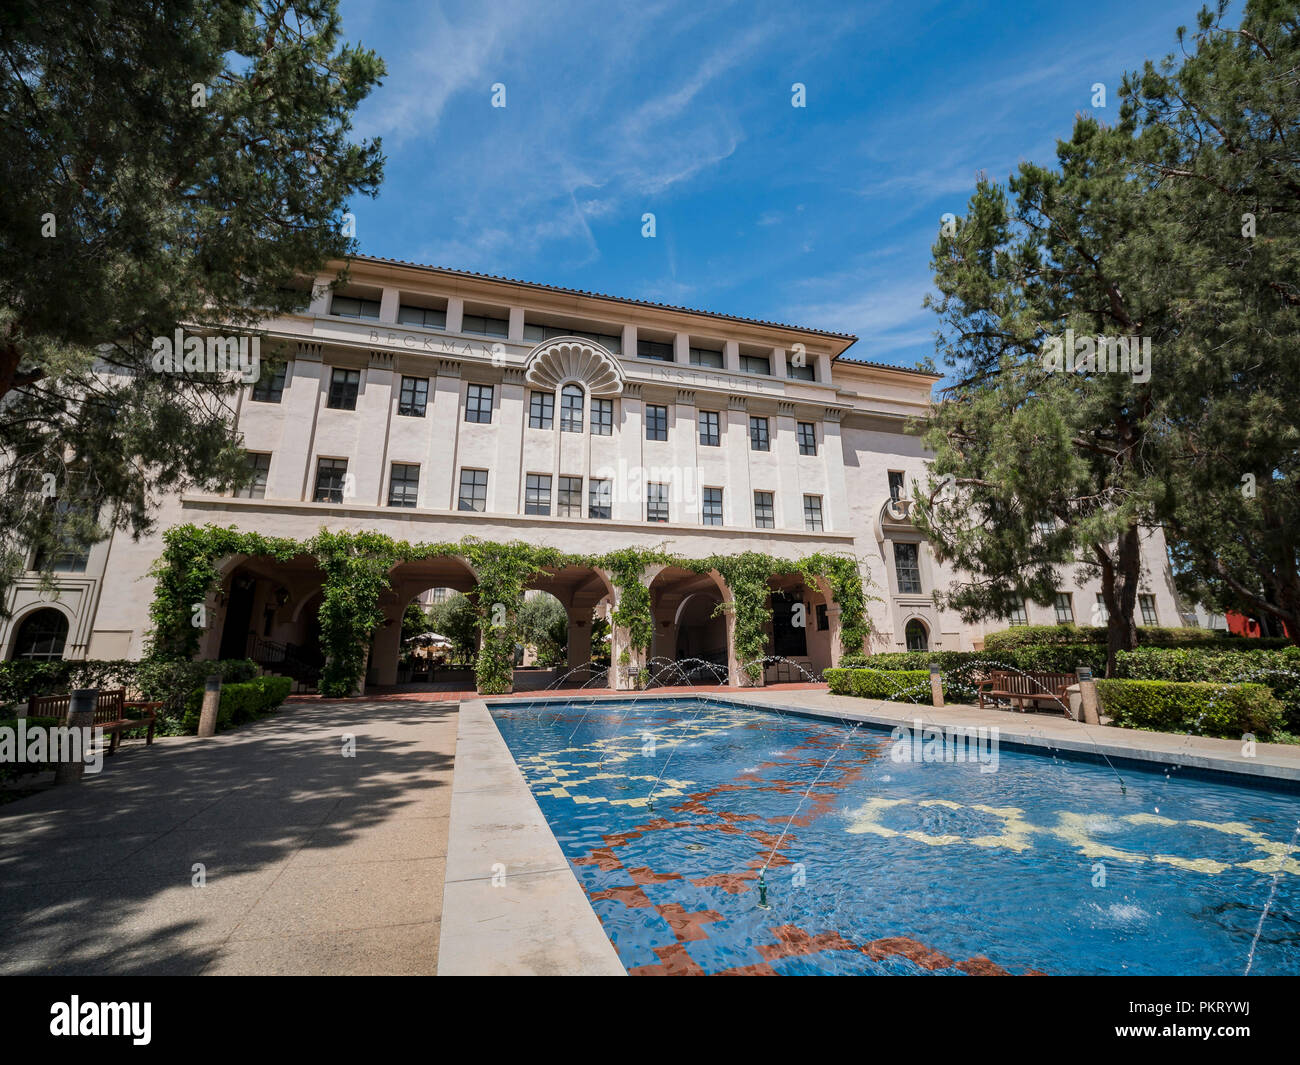 Los Angeles, JUL 21: Exterior view of the Beckman Institute in Caltech on JUL 21, 2018 at Los Angeles, California Stock Photo